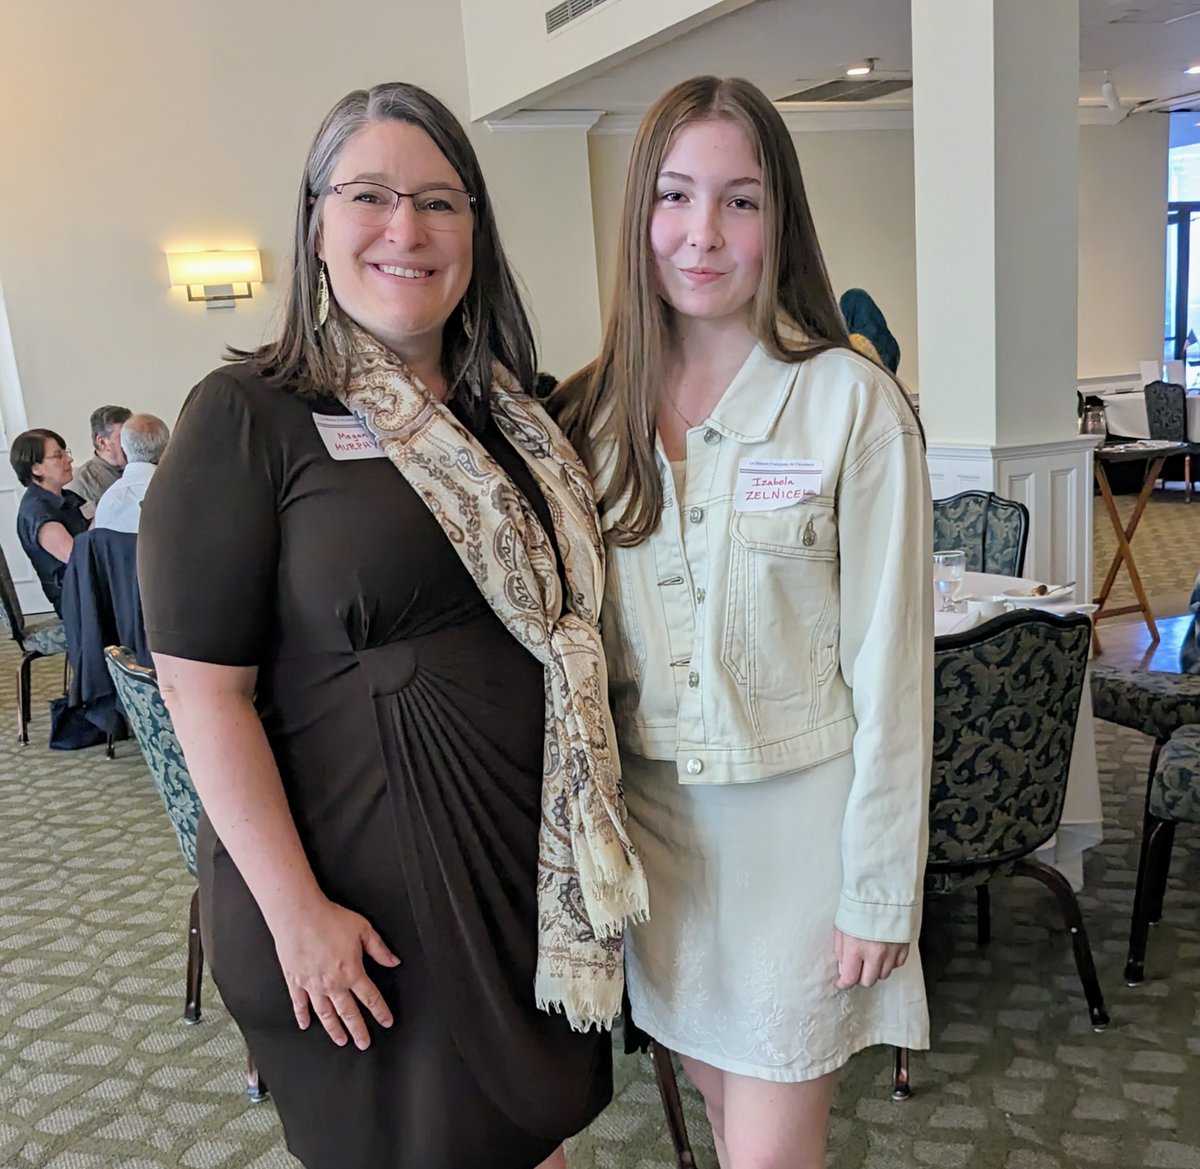 🌟 Izabela Zelnicek was awarded 4th place in the Maison Française de Cleveland's annual speaking competition for area high school students, le concours. She was recognized at a brunch at the Cleveland Skating Club. We are so proud of your accomplishment, Izabela! #TheBulldogWay